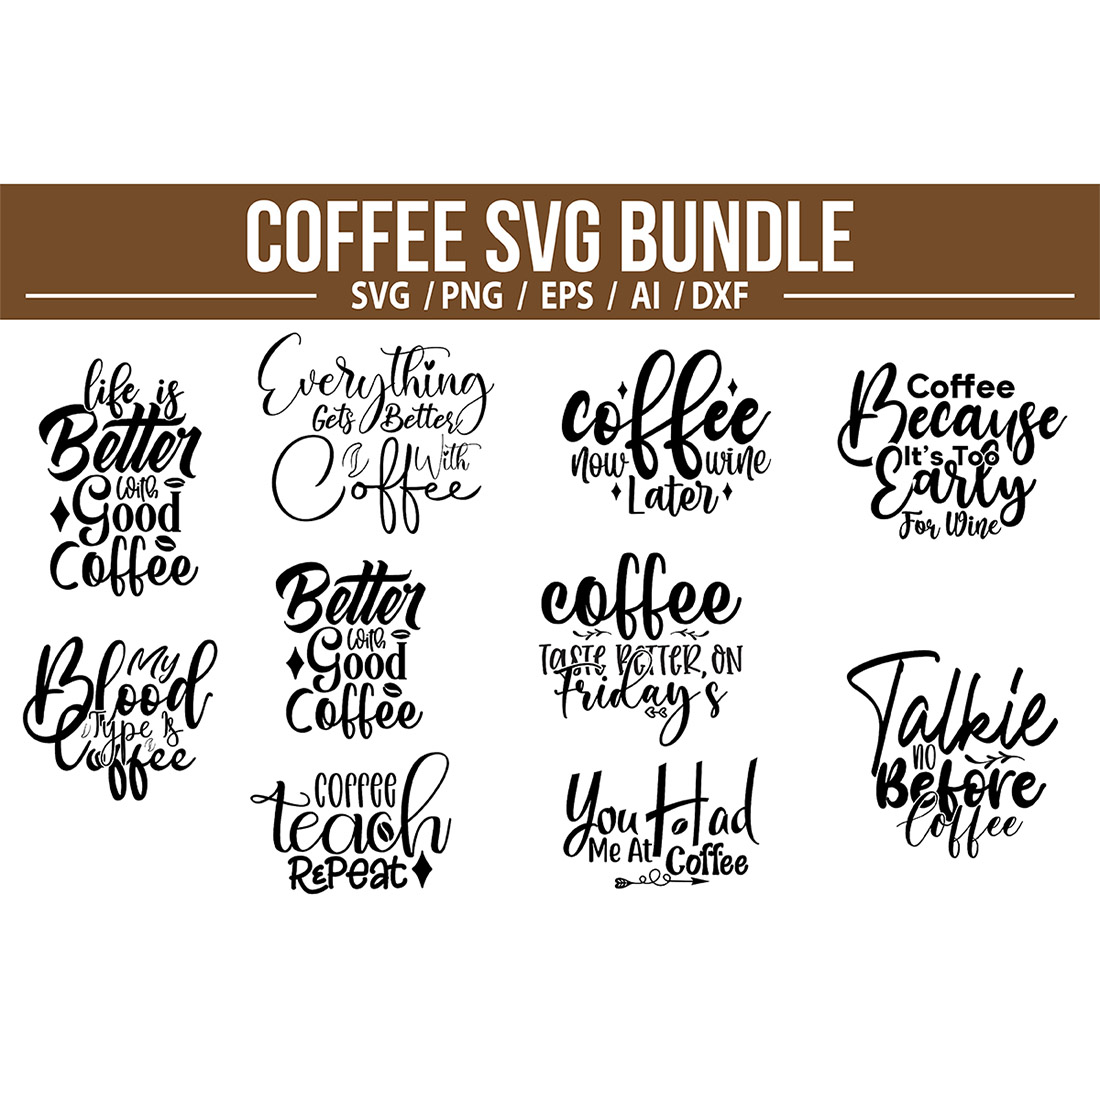 T-shirt Typography Coffee SVG Design Bundle cover image.